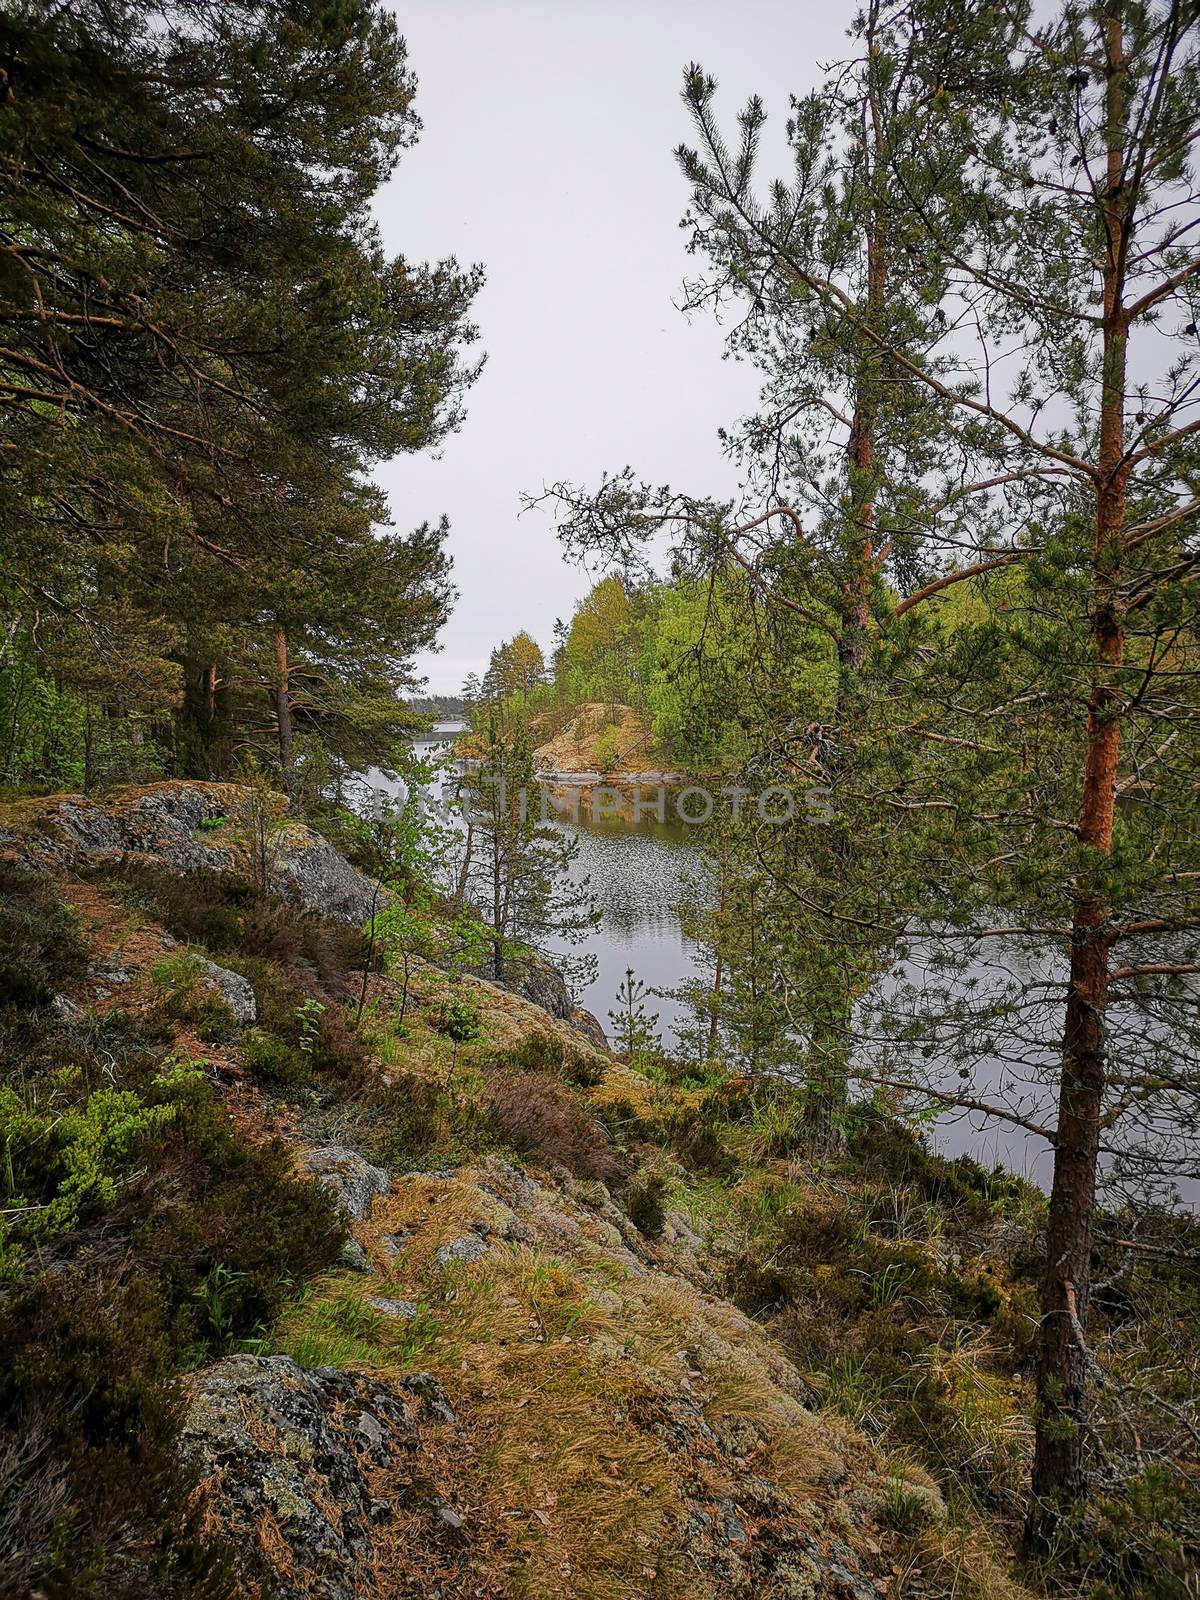 Landscape of lake, stones and pine forest in a rainy day